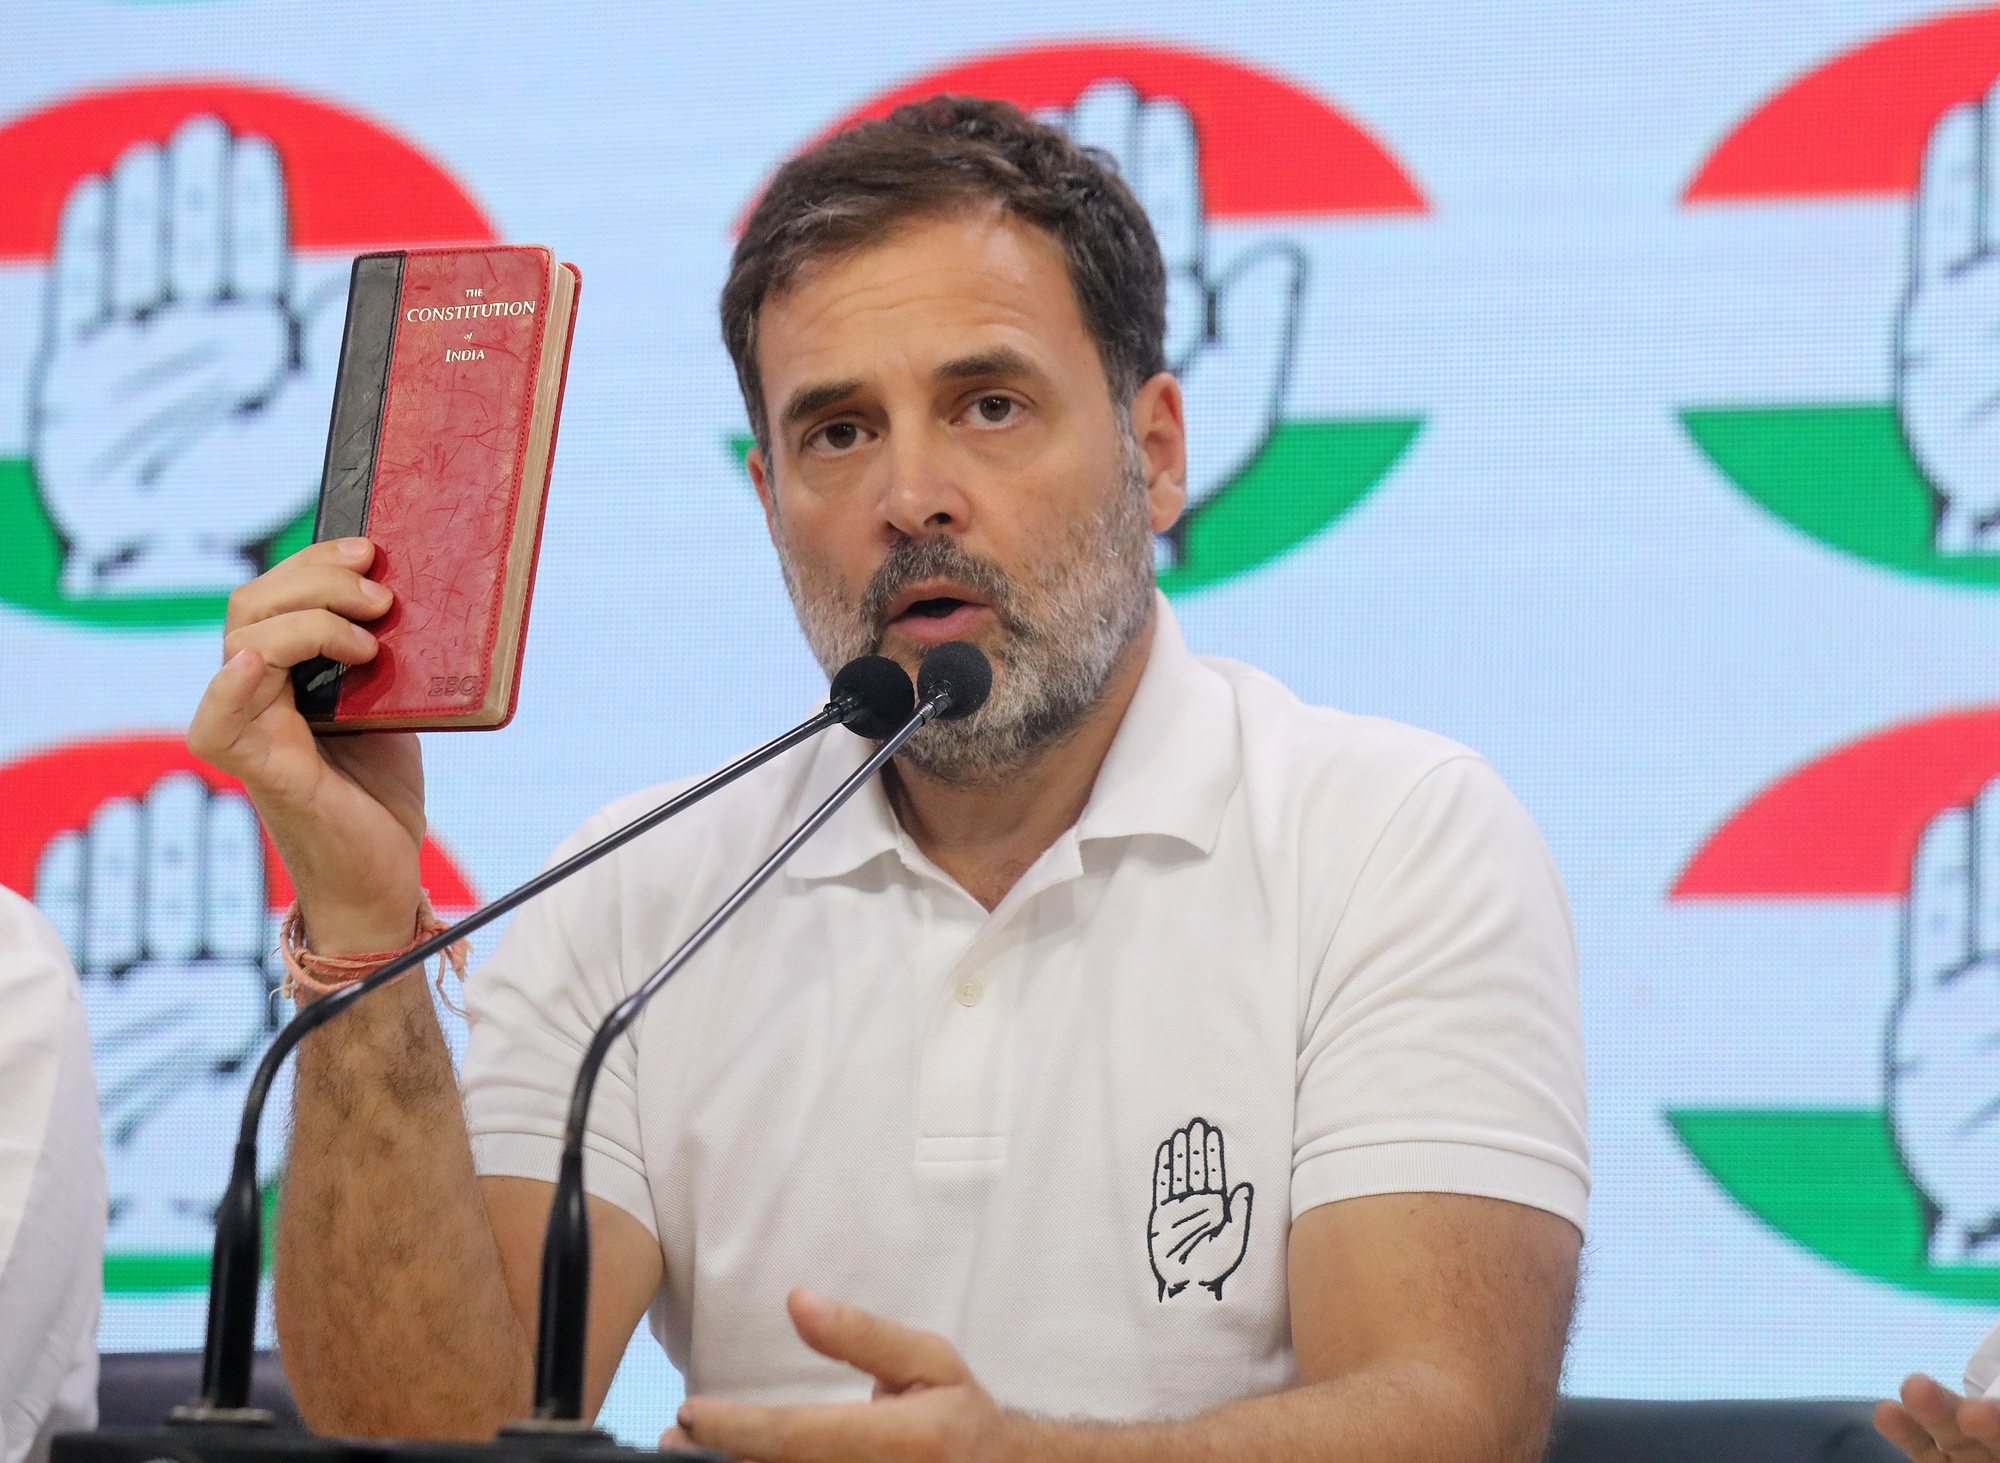 epa11390006 Indian National Congress Party senior leader Rahul Gandhi holds a copy of the Indian constitution as he speaks during a press conference at Congress headquarters in New Delhi, India, 04 June 2024. Bharatiya Janata Party (BJP) leader and Indian Prime Minister Narendra Modi claimed victory in the 2024 India elections which started on 19 April. The Lok Sabha elections were held for 545 lower house seats, and a party or alliance needs 272 seats to form a government.  EPA/RAJAT GUPTA